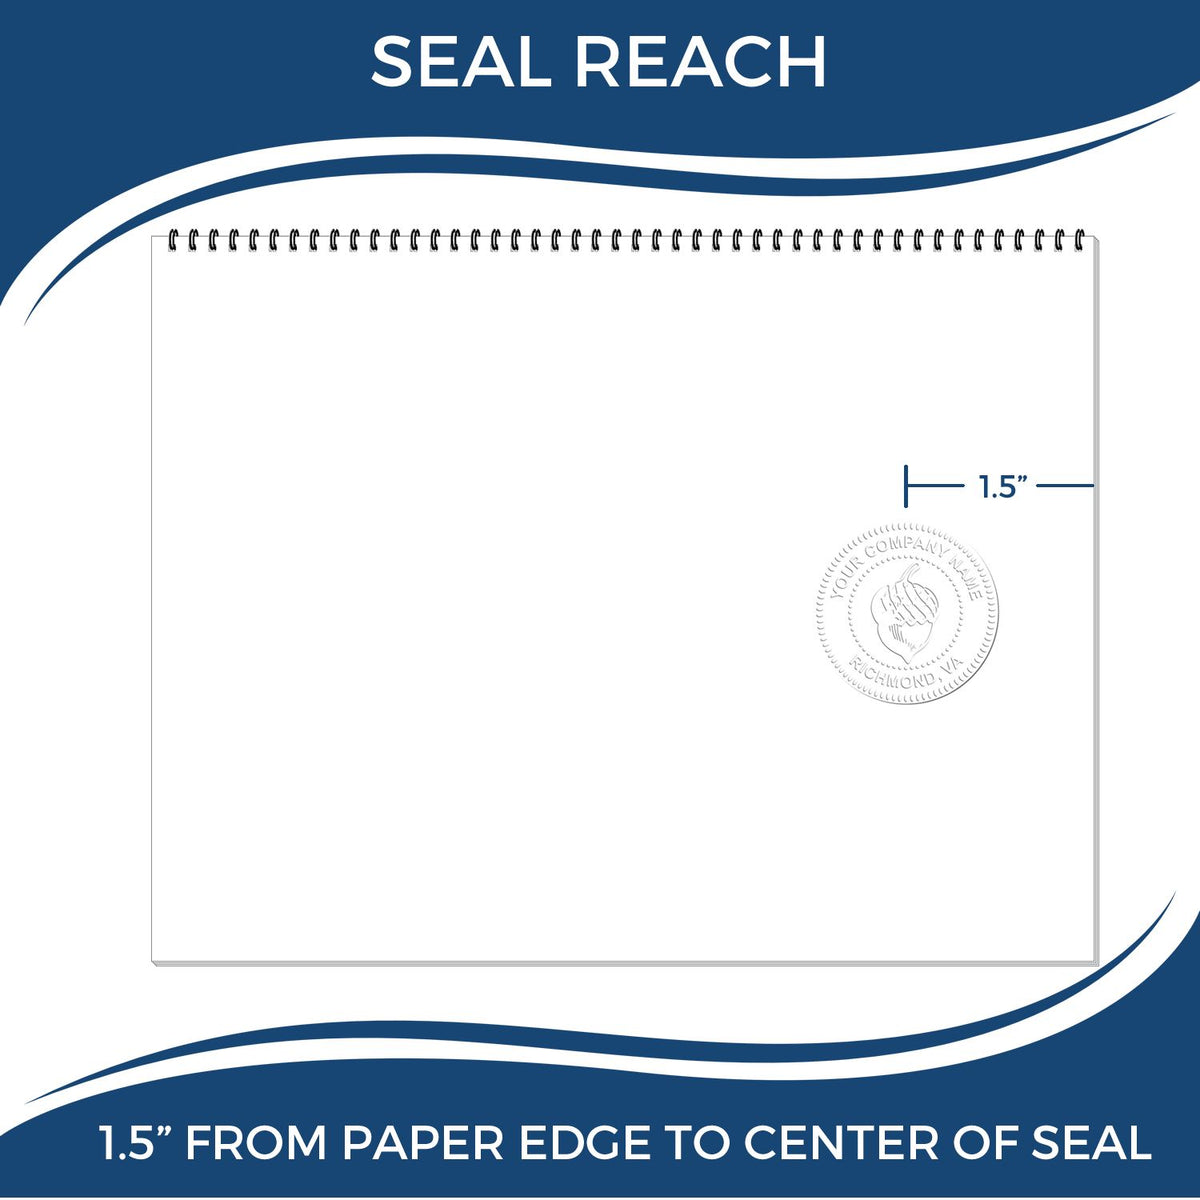 An infographic showing the seal reach which is represented by a ruler and a miniature seal image of the Handheld Tennessee Professional Engineer Embosser